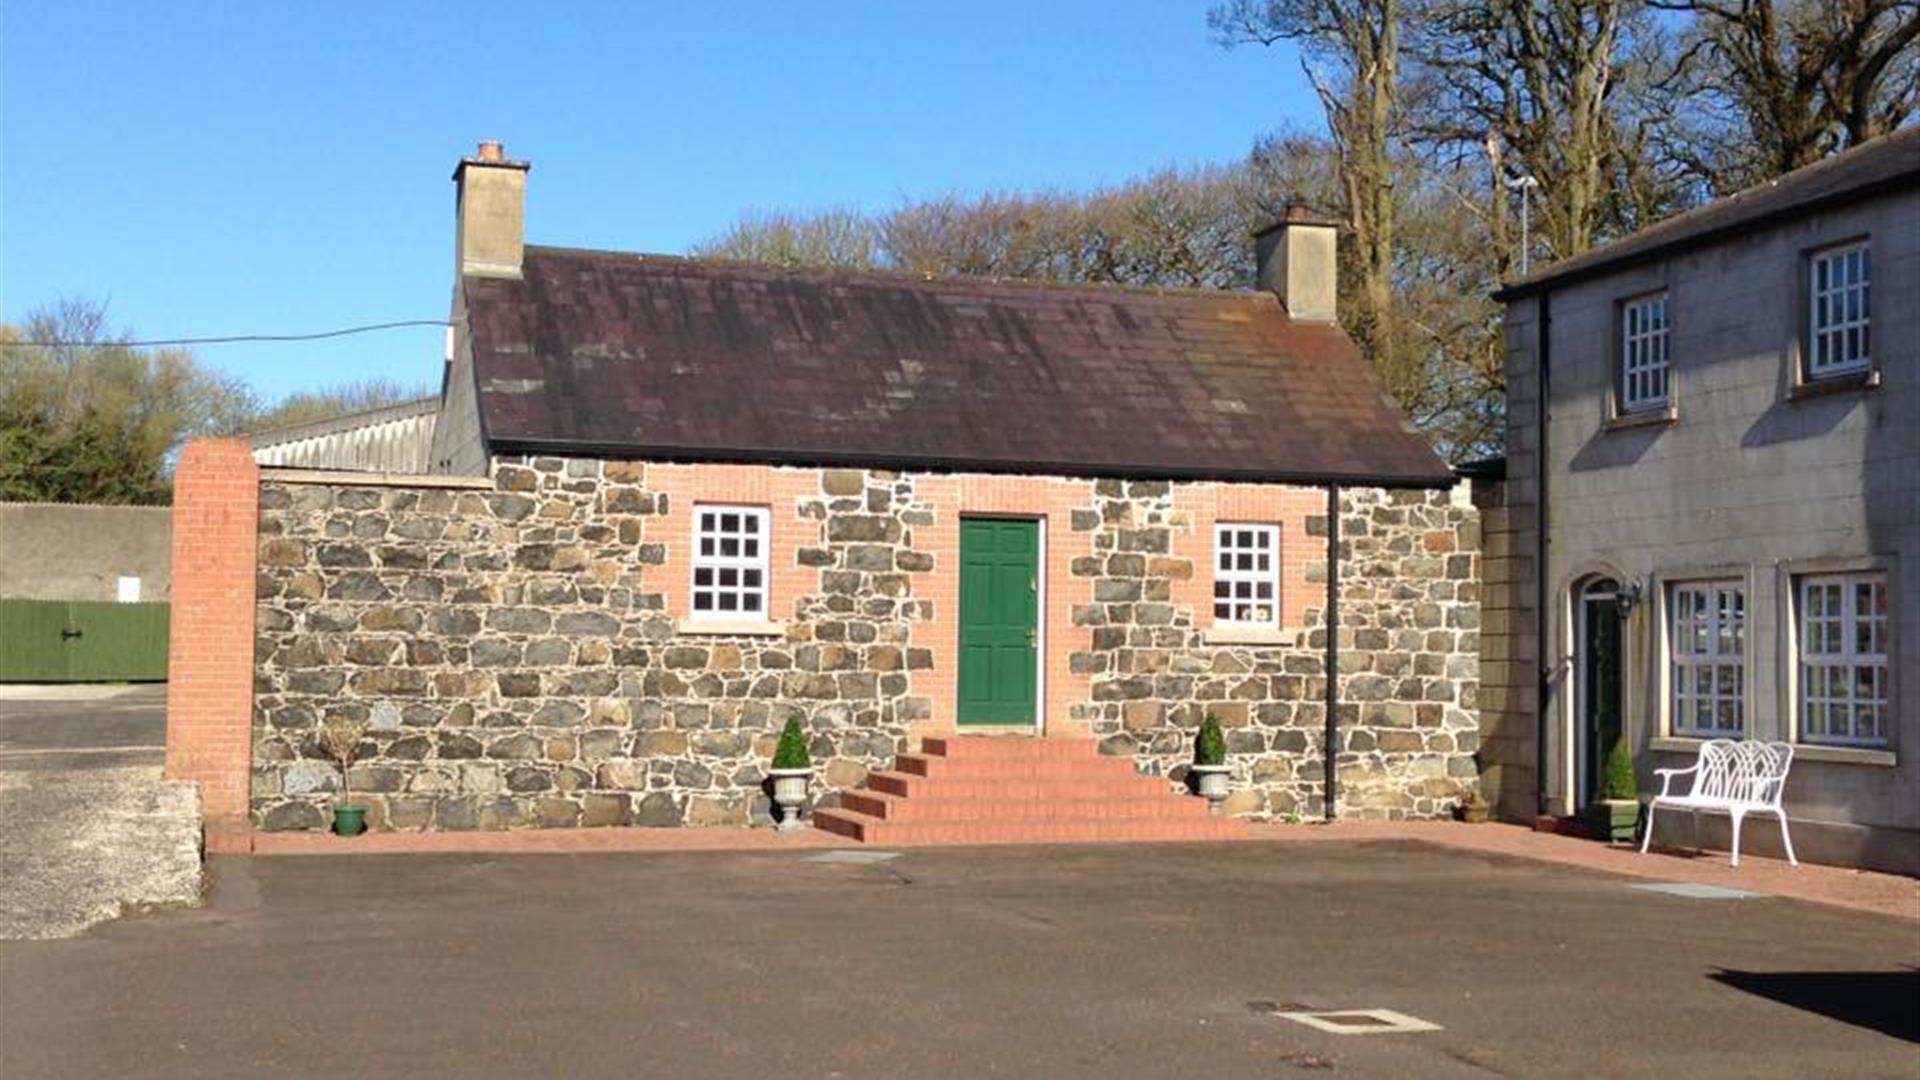 outside image of the Apple house with green door and stone walls